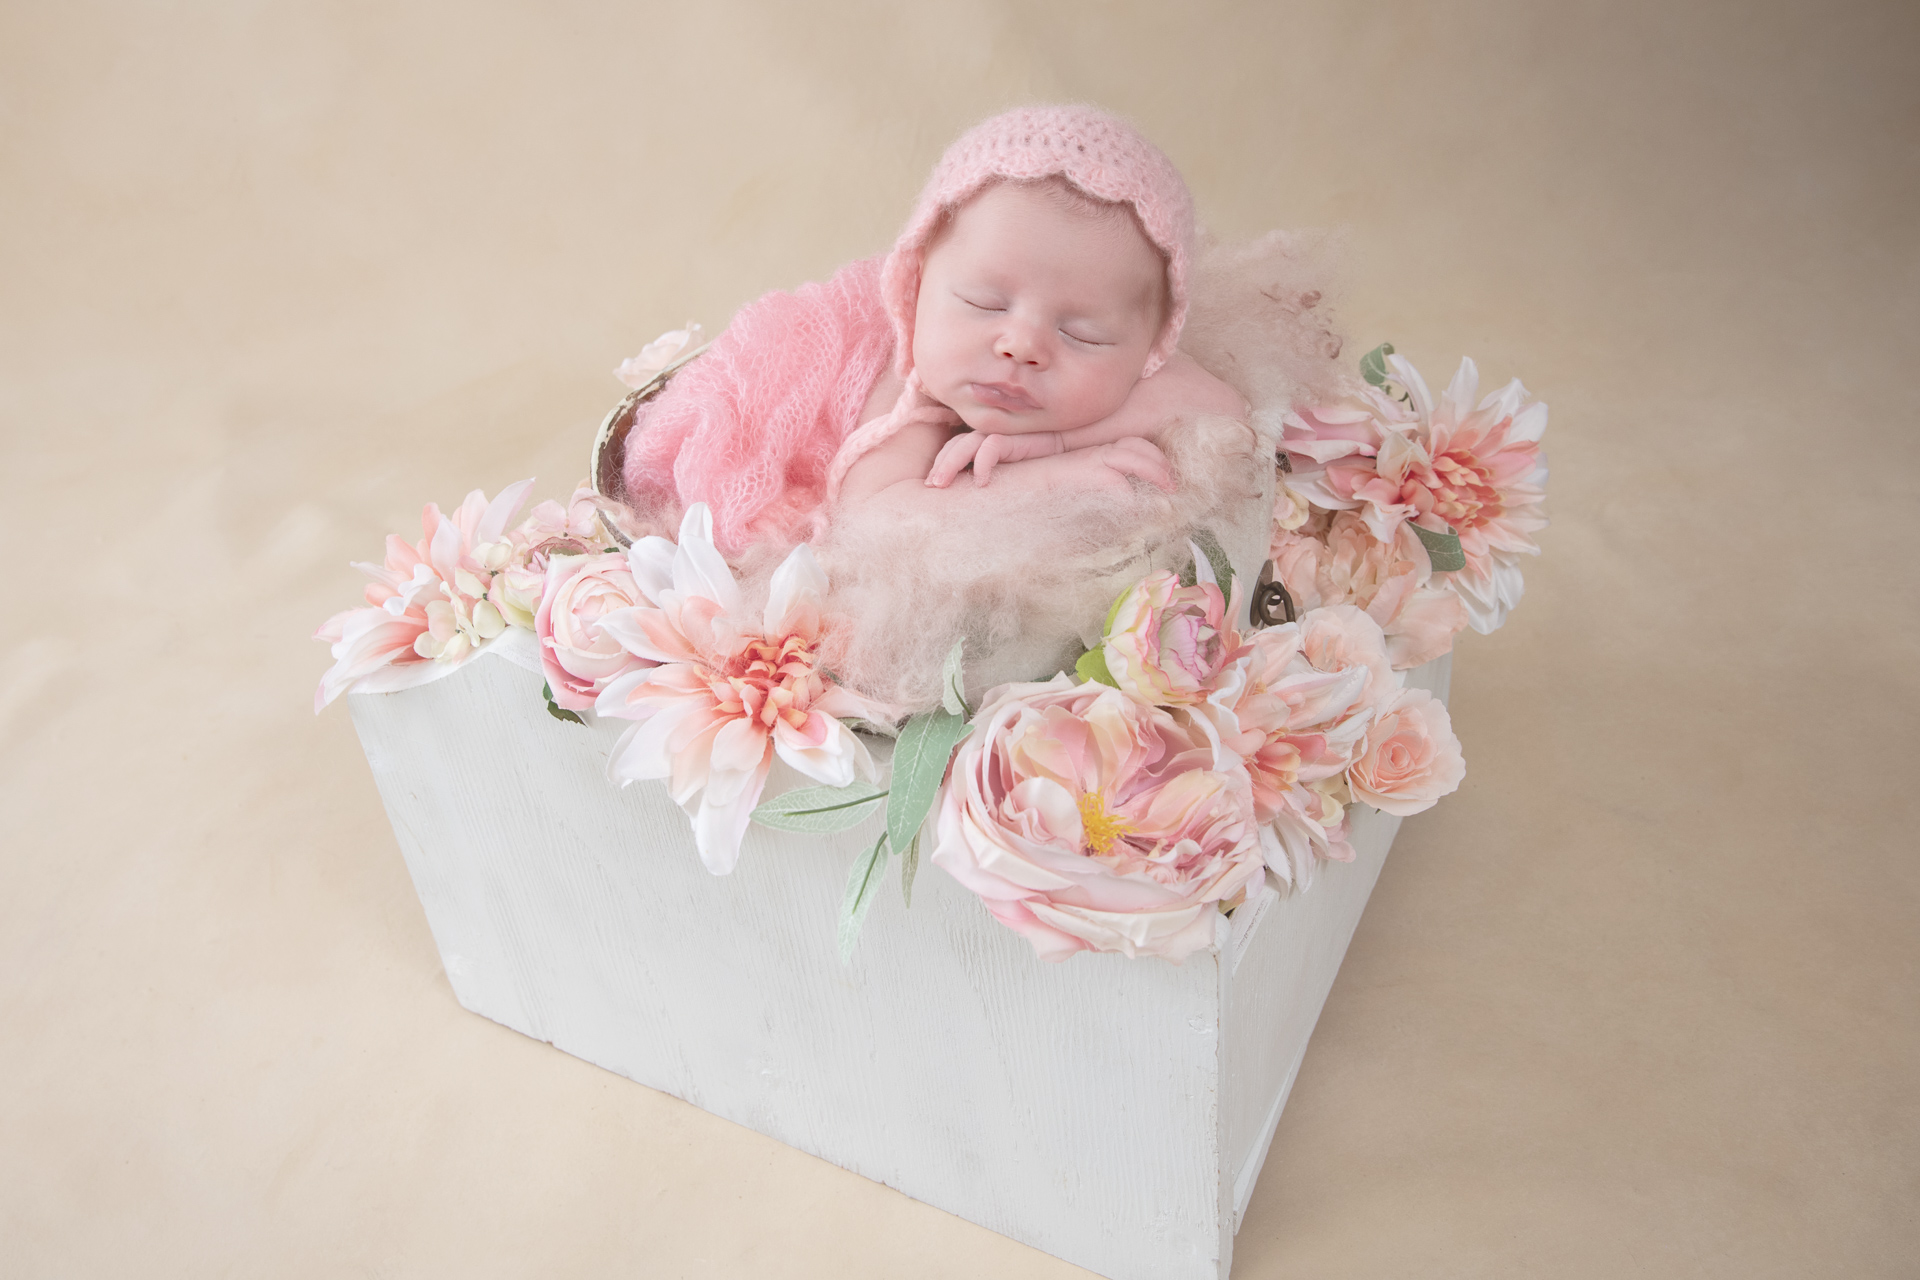 Newborn wearing pink hat and pink wrap rests on square basket prop among pink flowers which are decorating the scene. Beige backdrop.